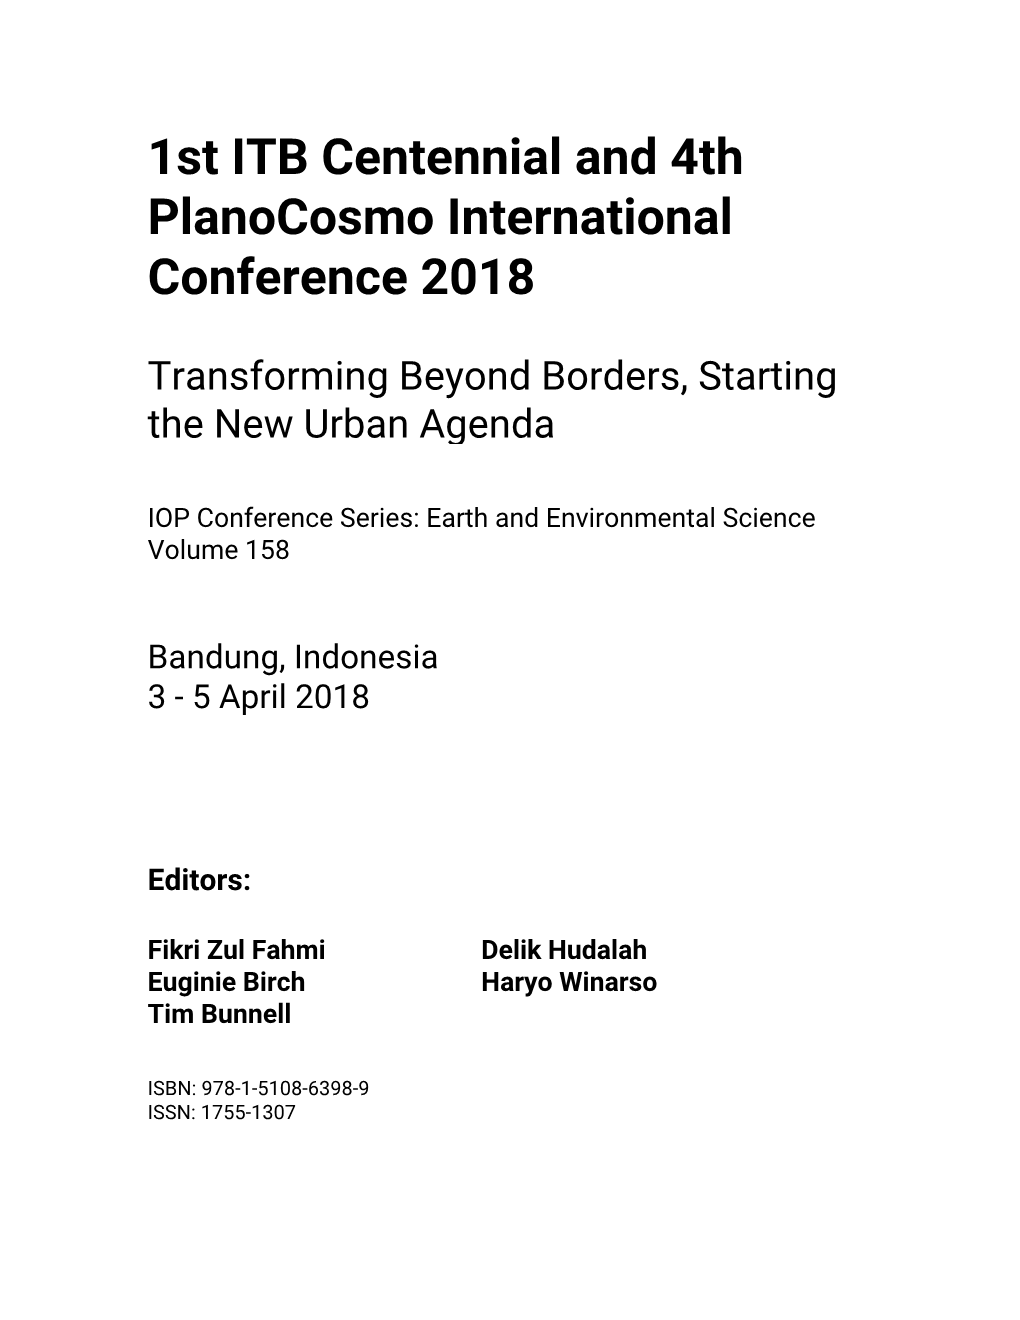 1St ITB Centennial and 4Th Planocosmo International Conference